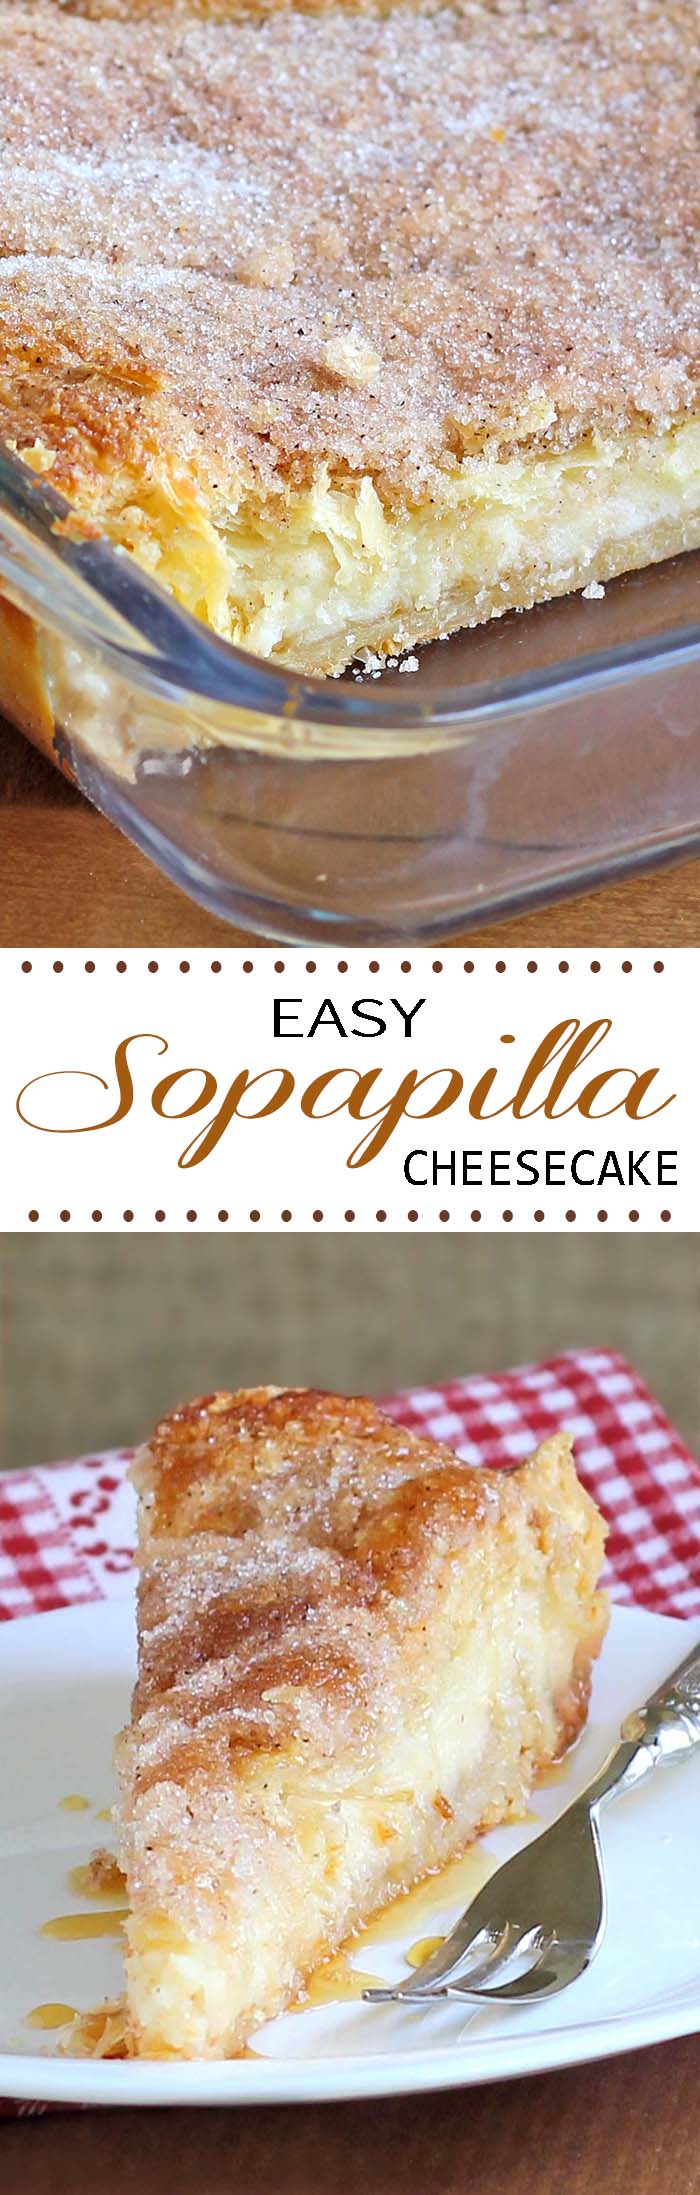 Sopapilla Cheesecake Dessert? Check. Easy? Check. So freakin’ good they’ll blow your mind? Check.